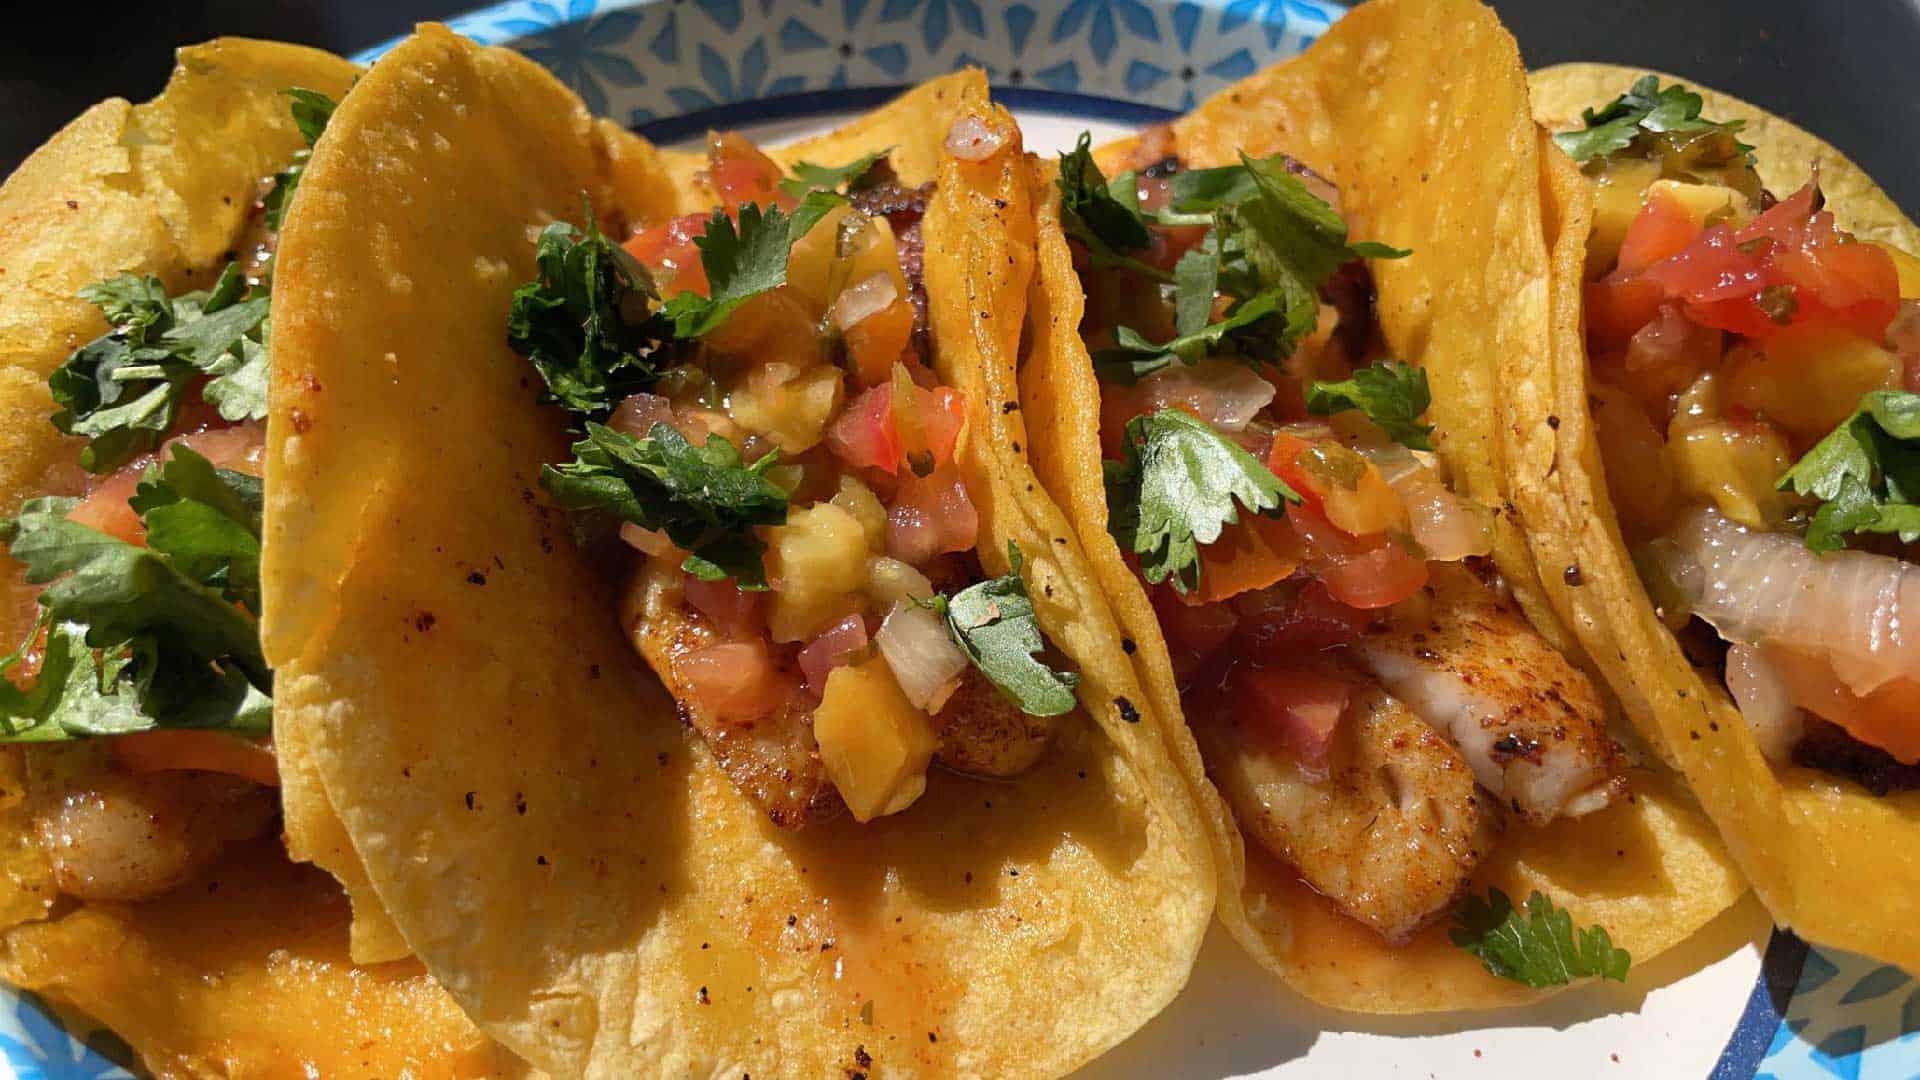 Daniel Arm’s of Arms Family Homestead shares his fish taco recipe